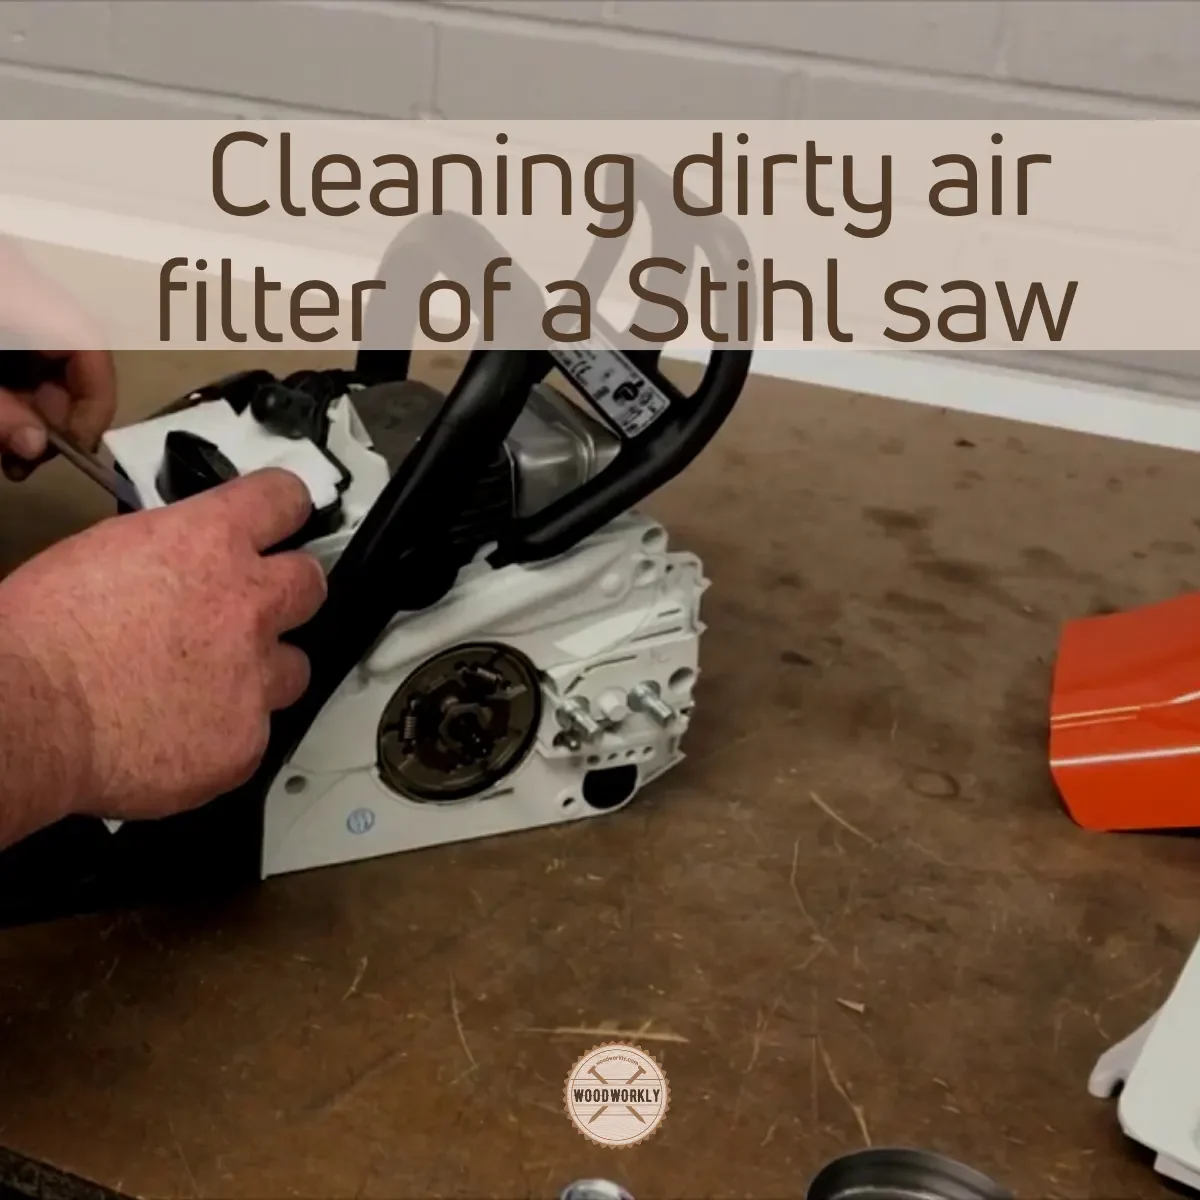 Cleaning dirty air filter of a Stihl saw